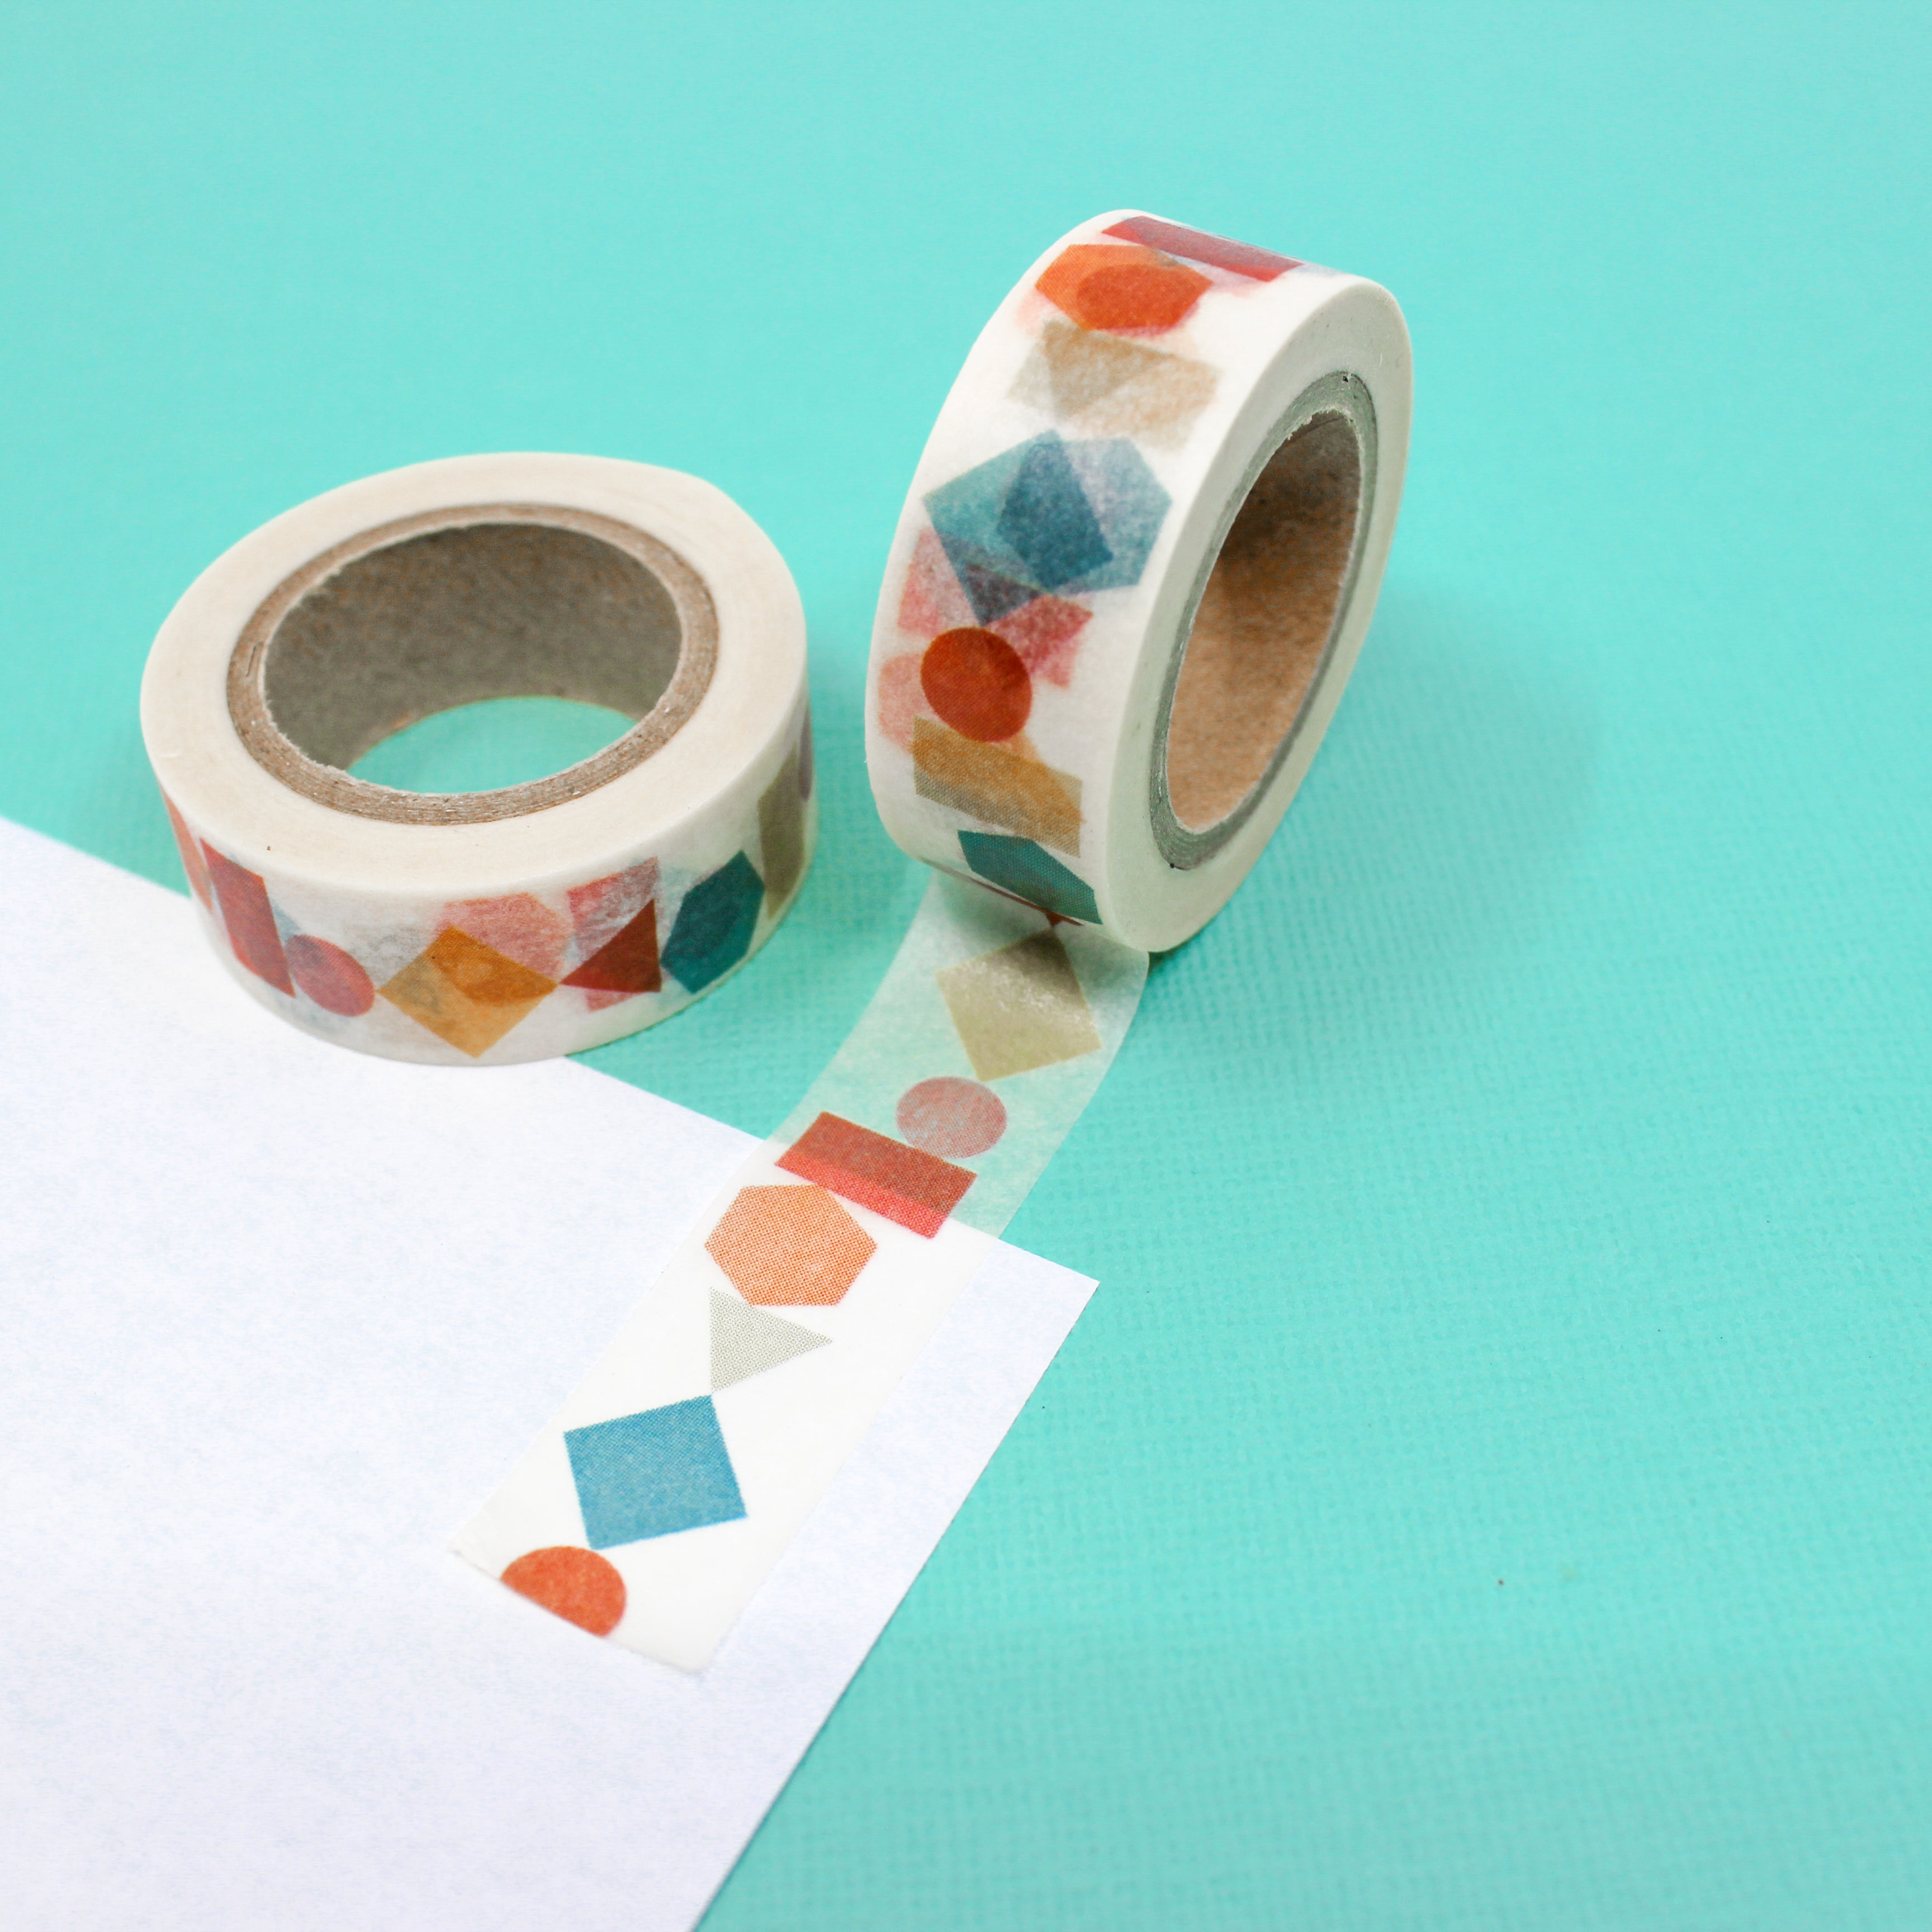 This is a colorful geometrical shapes pattern washi tape from BBB Supplies Craft Shop